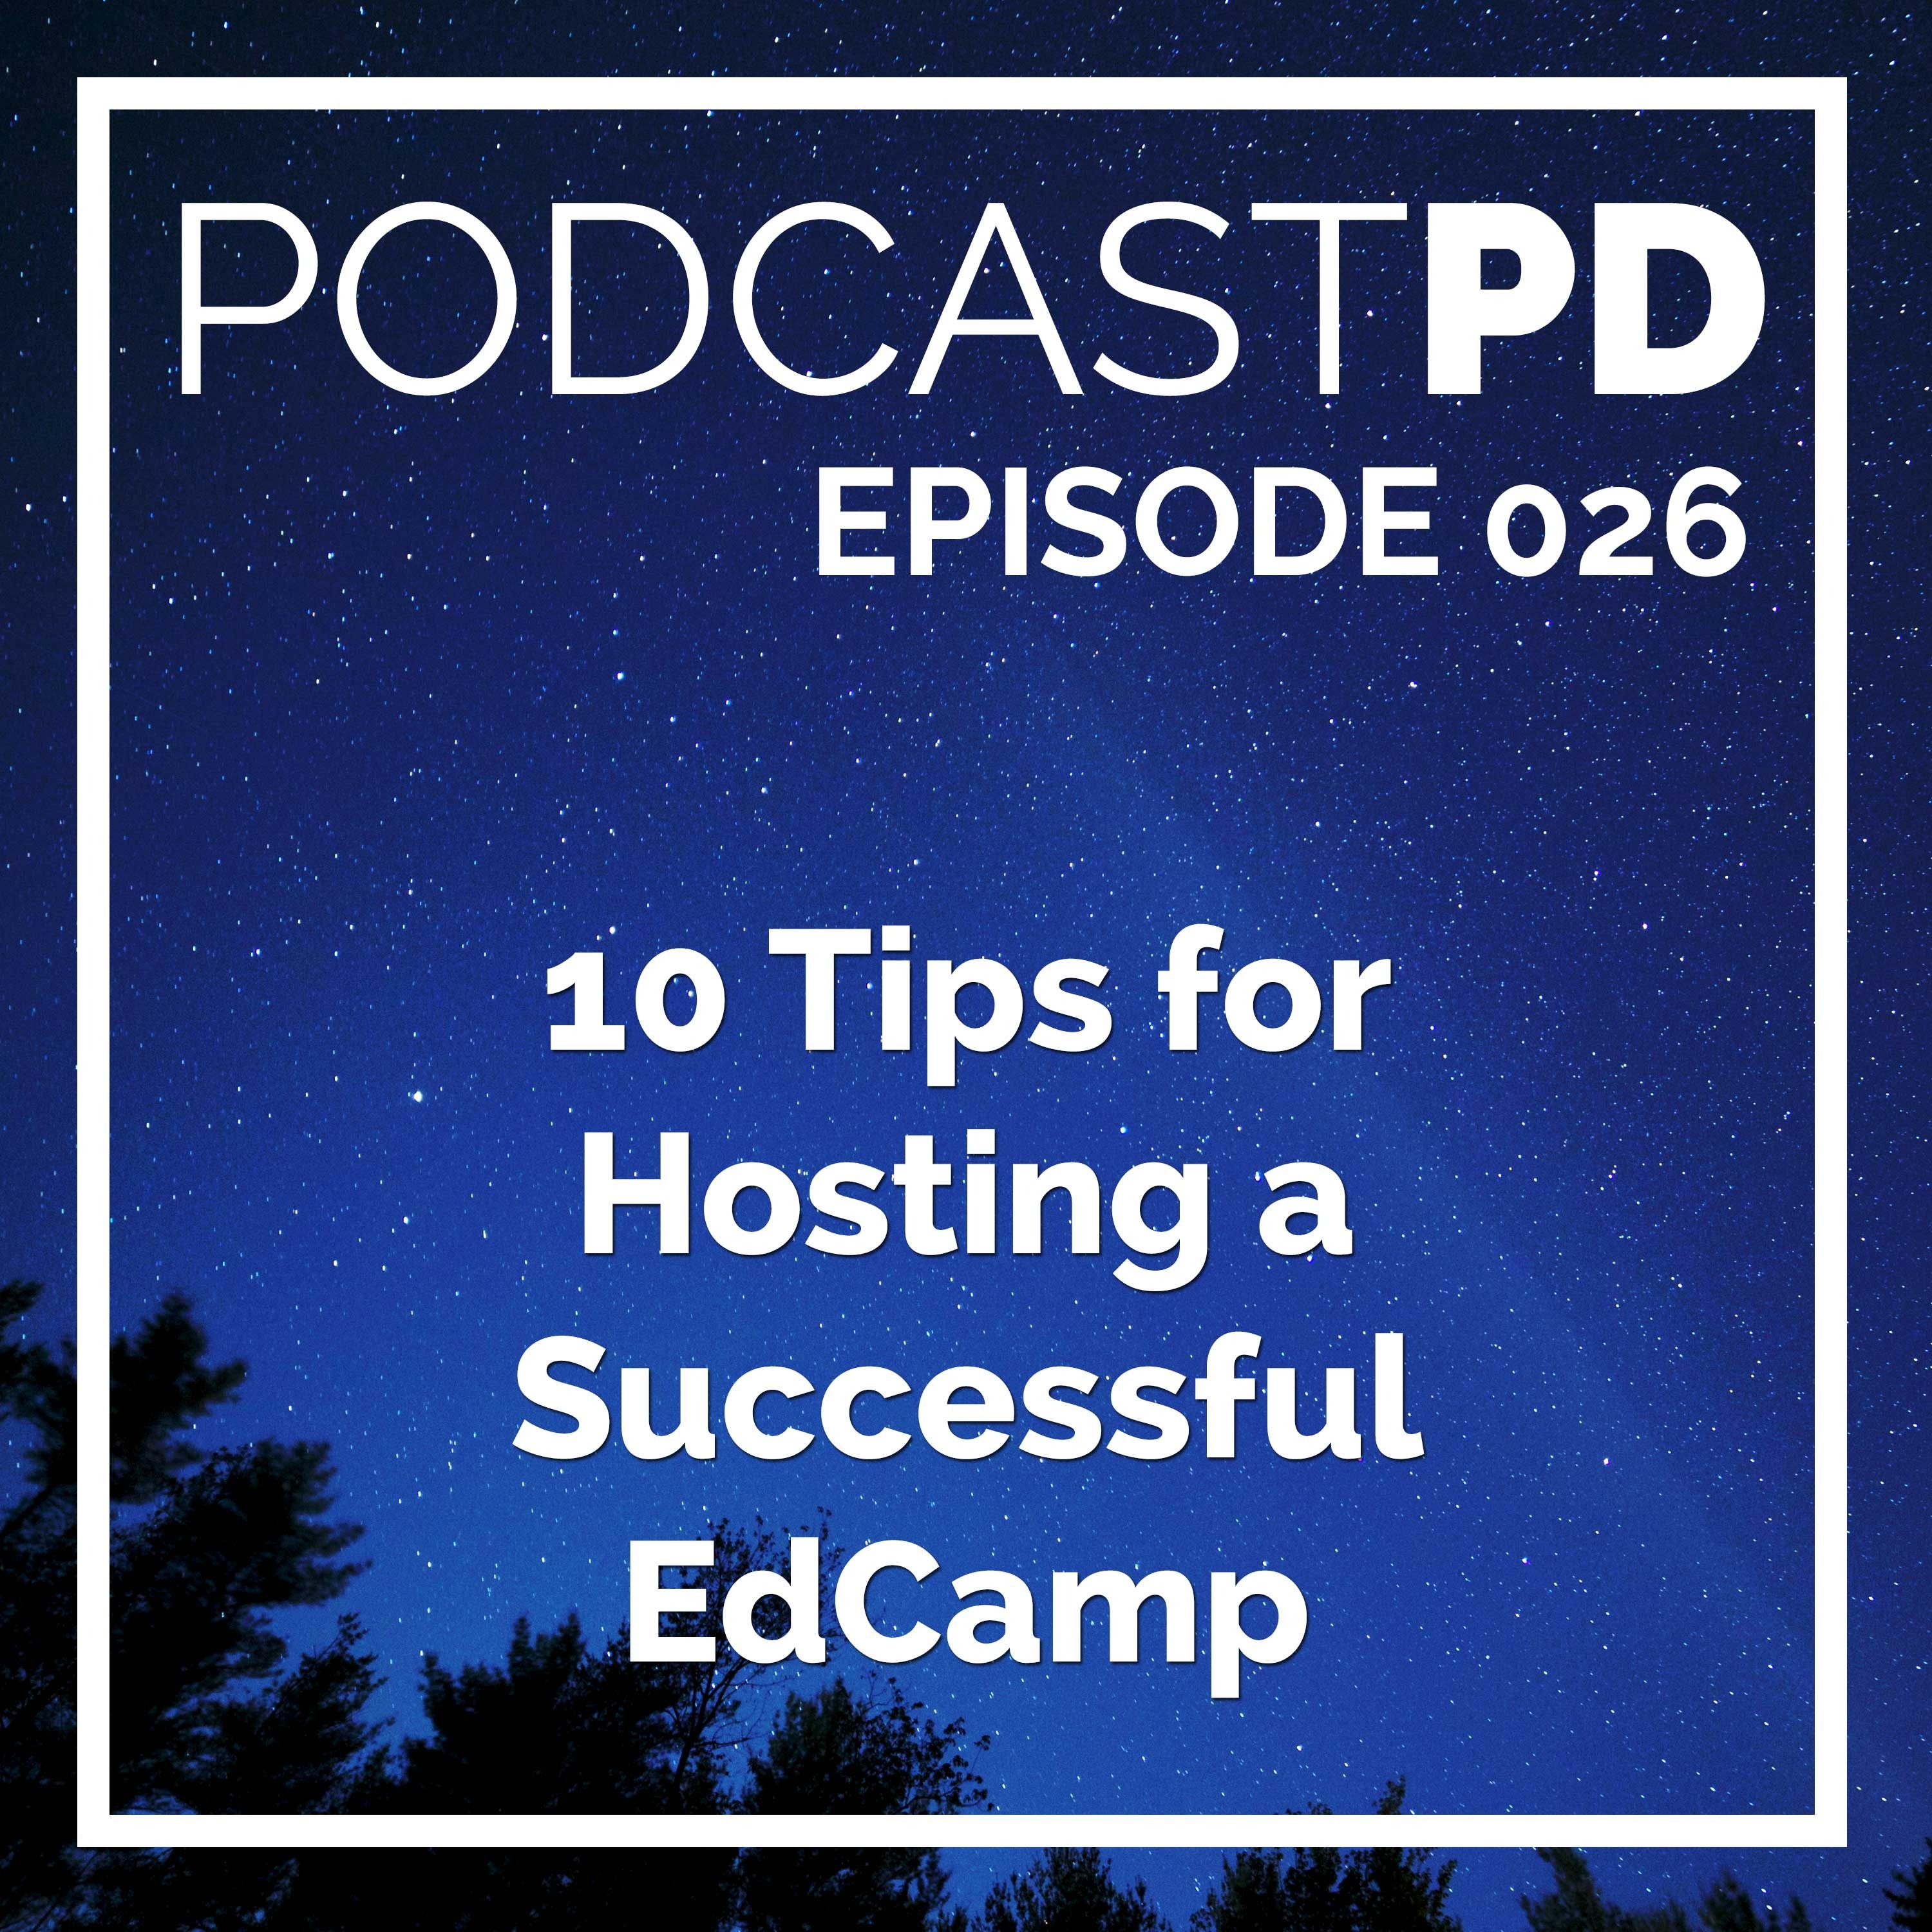 10 Tips for Hosting a Successful EdCamp Image